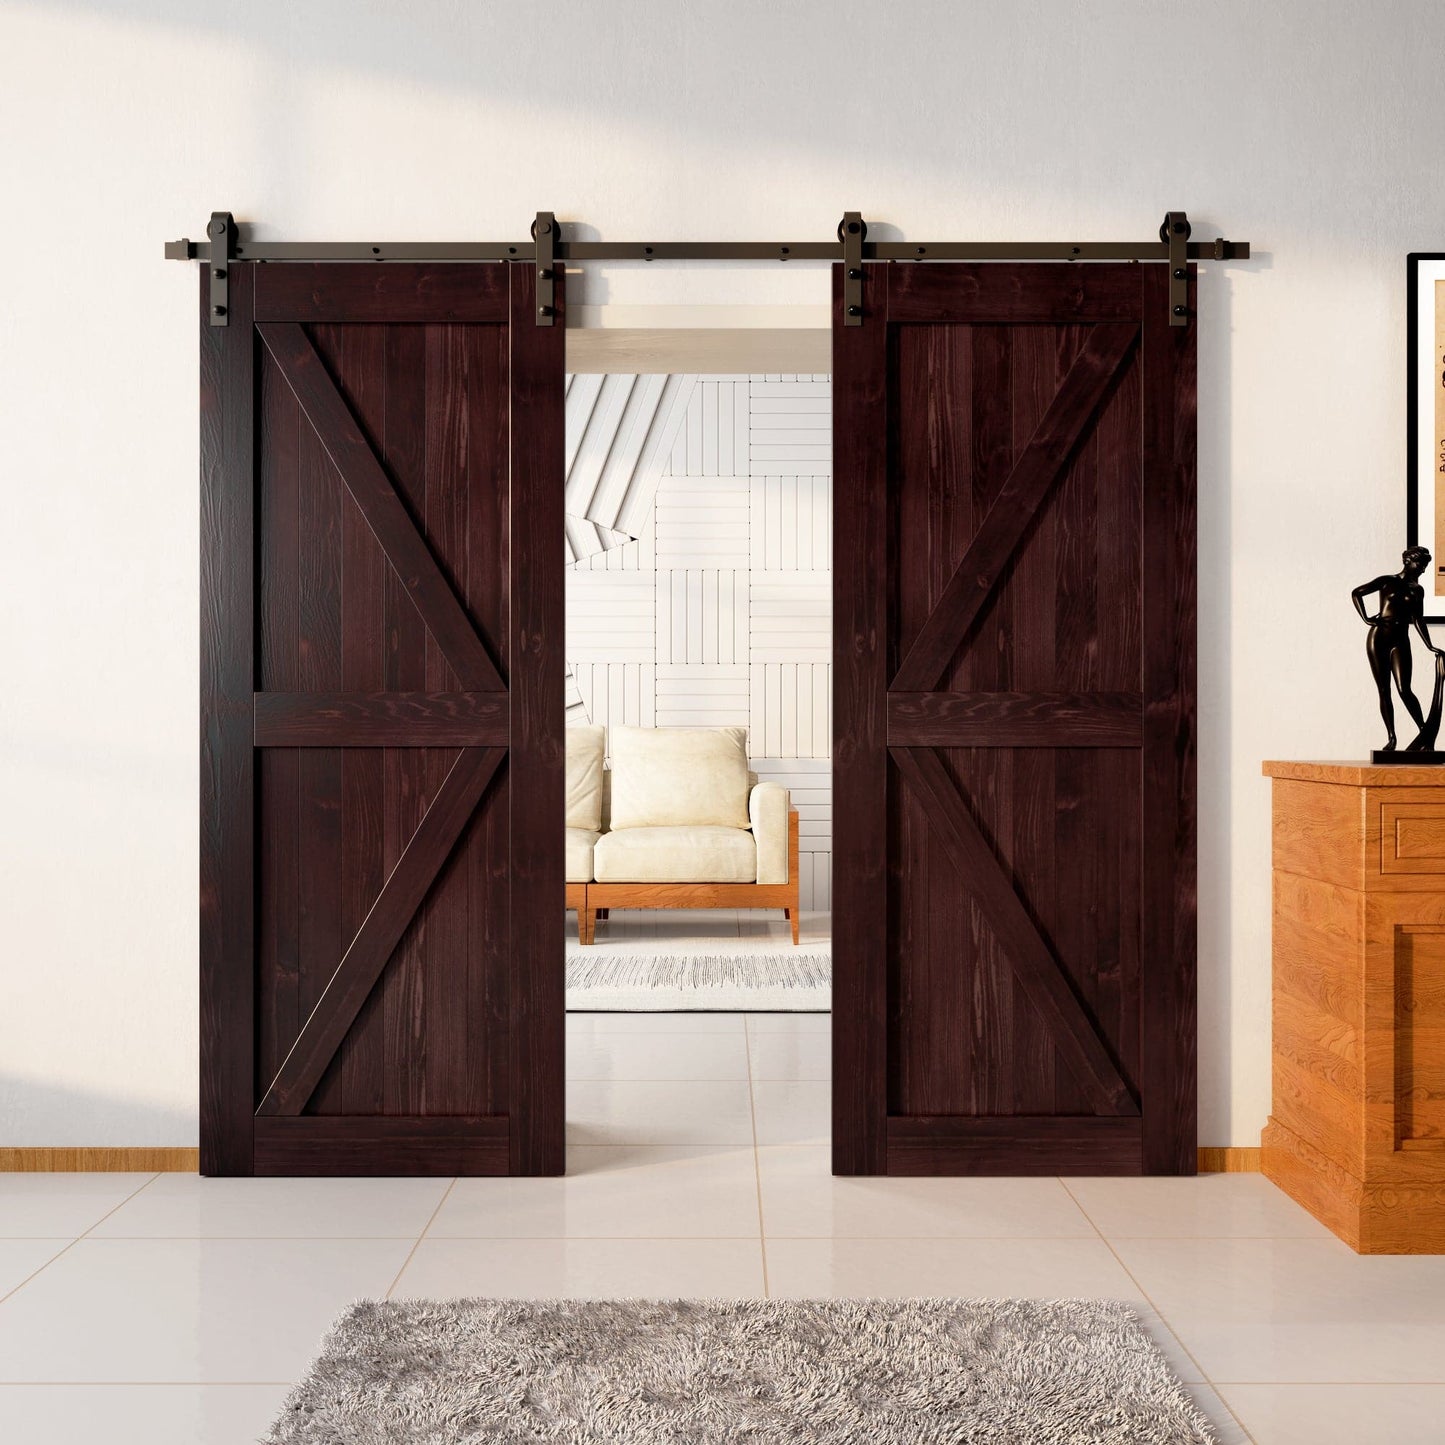 Finished & Unassembled Double Barn Door with Non-Bypass Installation Hardware Kit (Arrow Design)